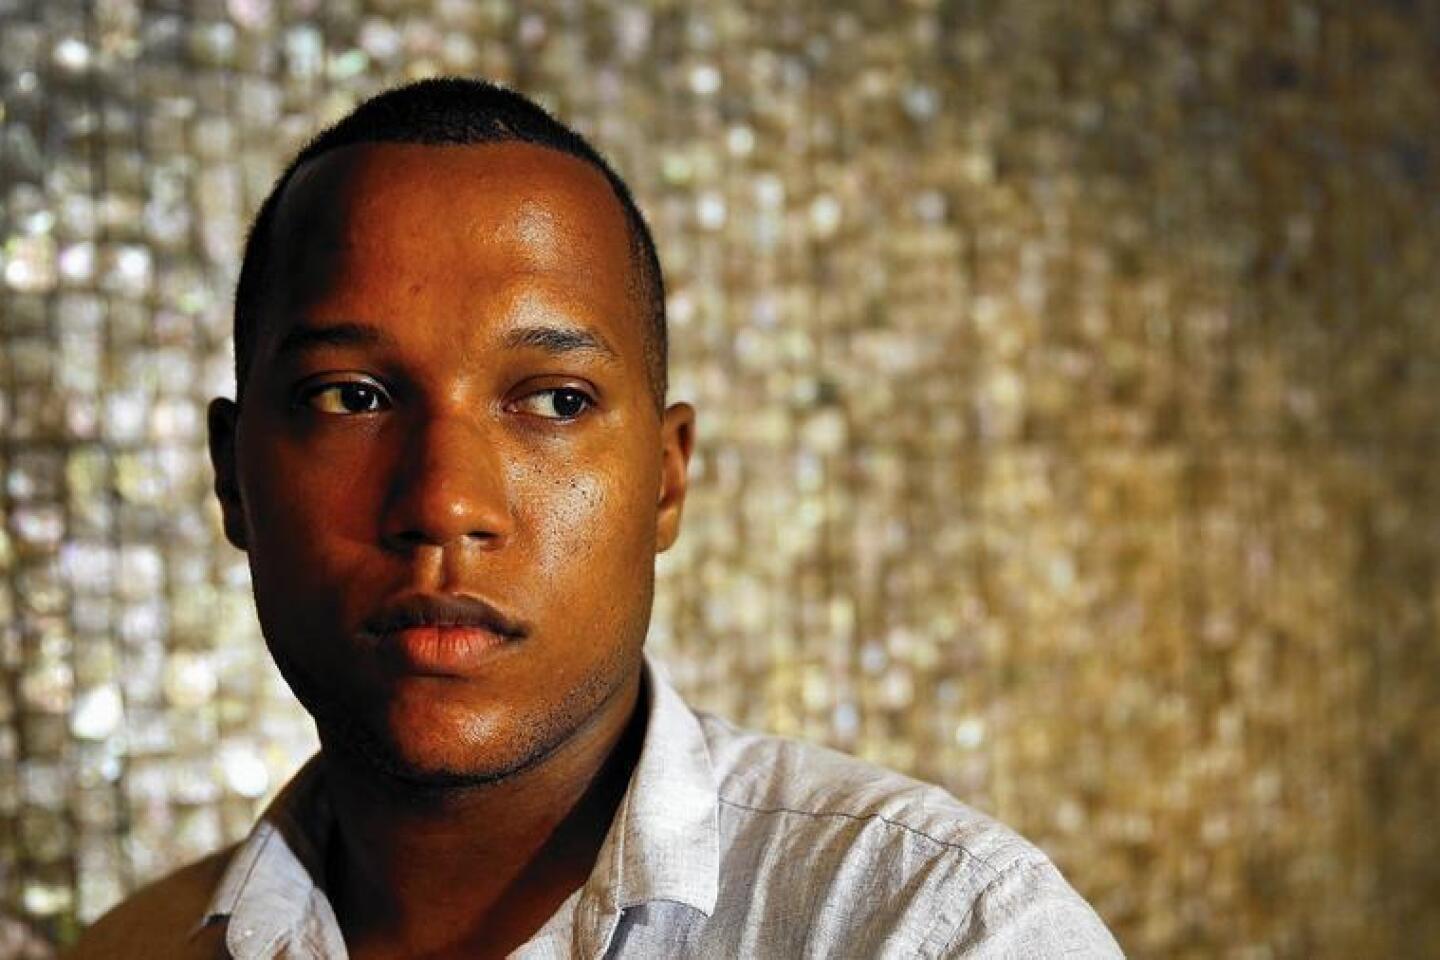 Arts and culture in pictures by The Times | 'Appropriate' writer Branden Jacobs-Jenkins